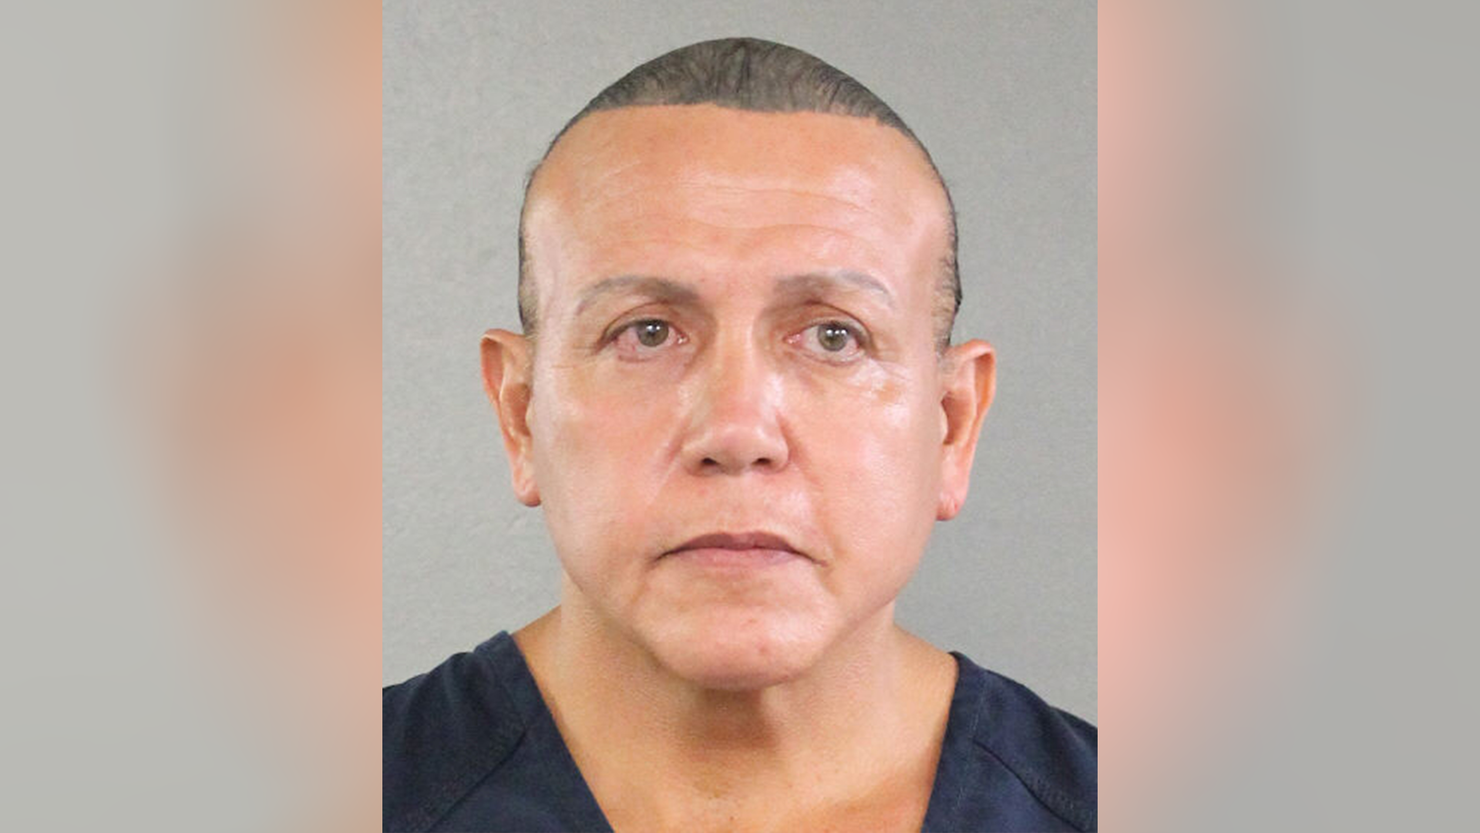 Cesar Sayoc pleads not guilty to charges of sending pipe bombs through mail